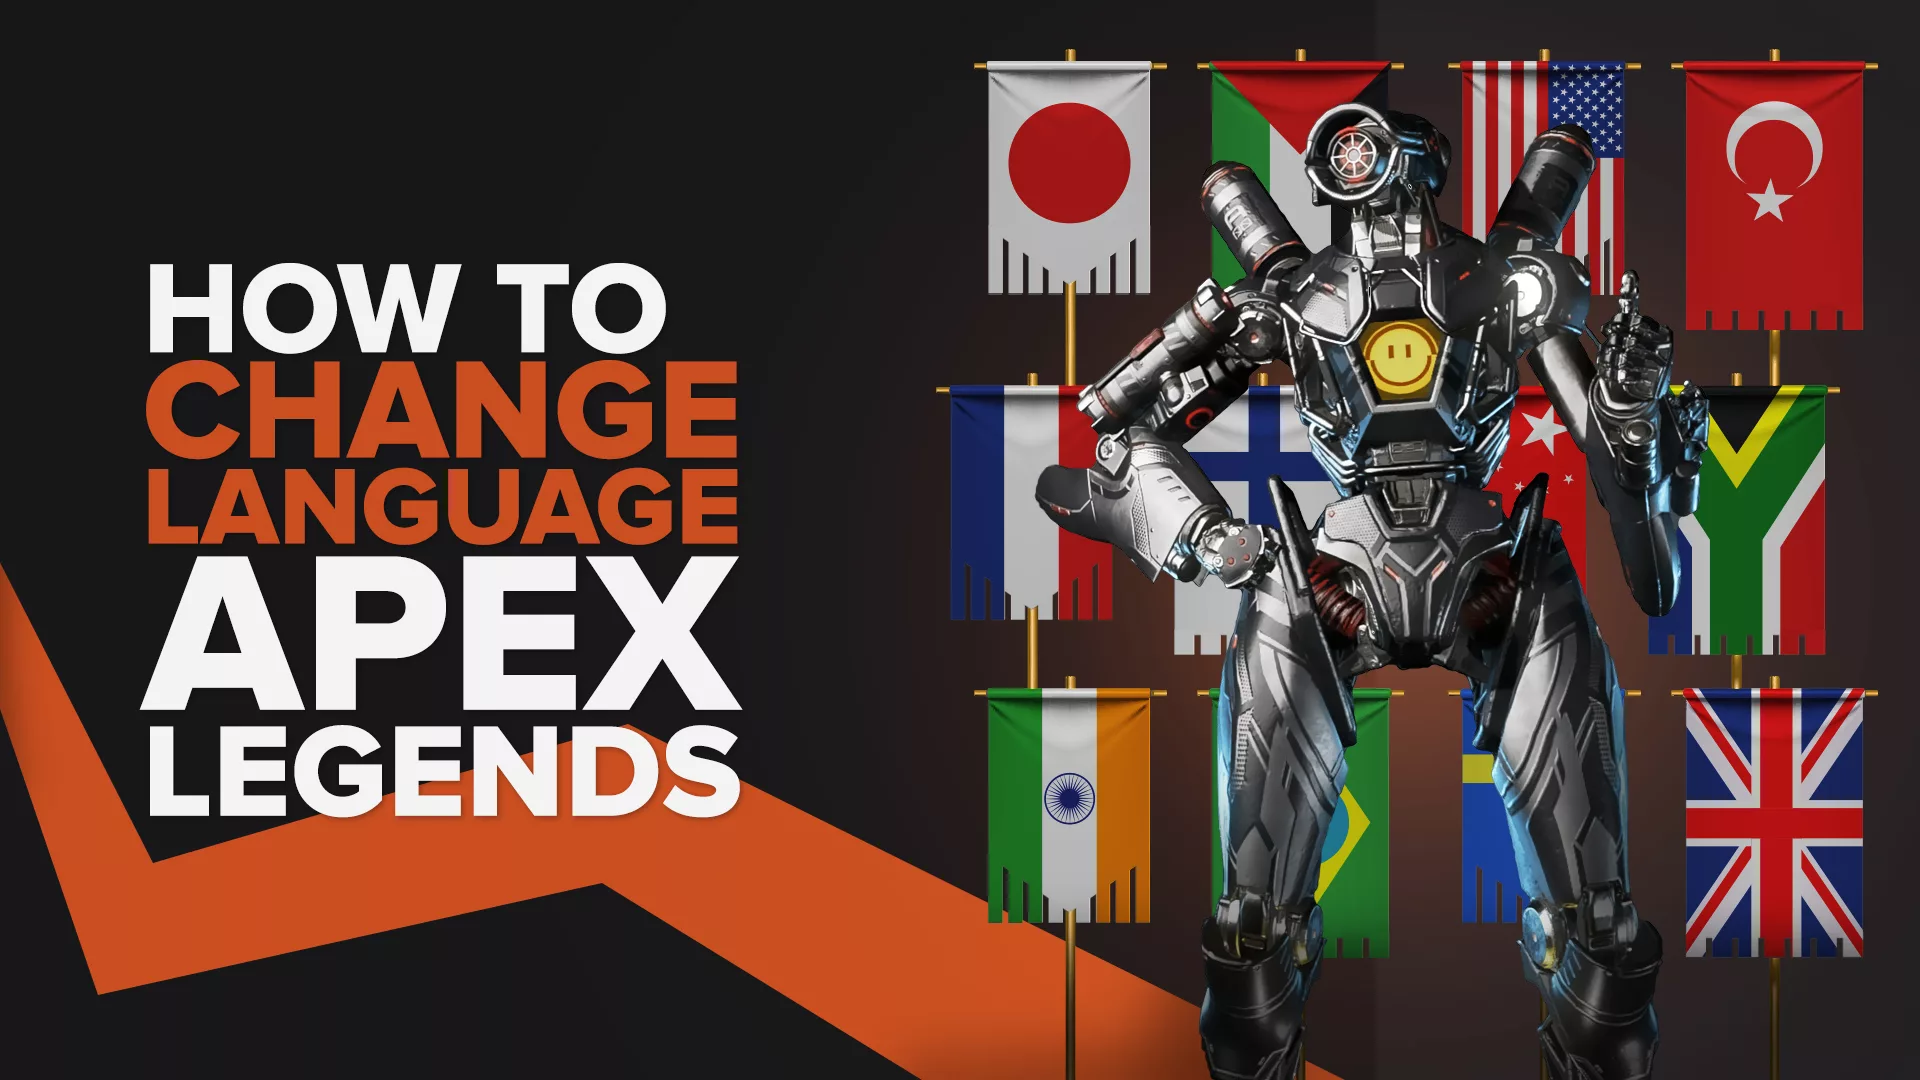 How To Change Language in Apex Legends Easily On All Platforms